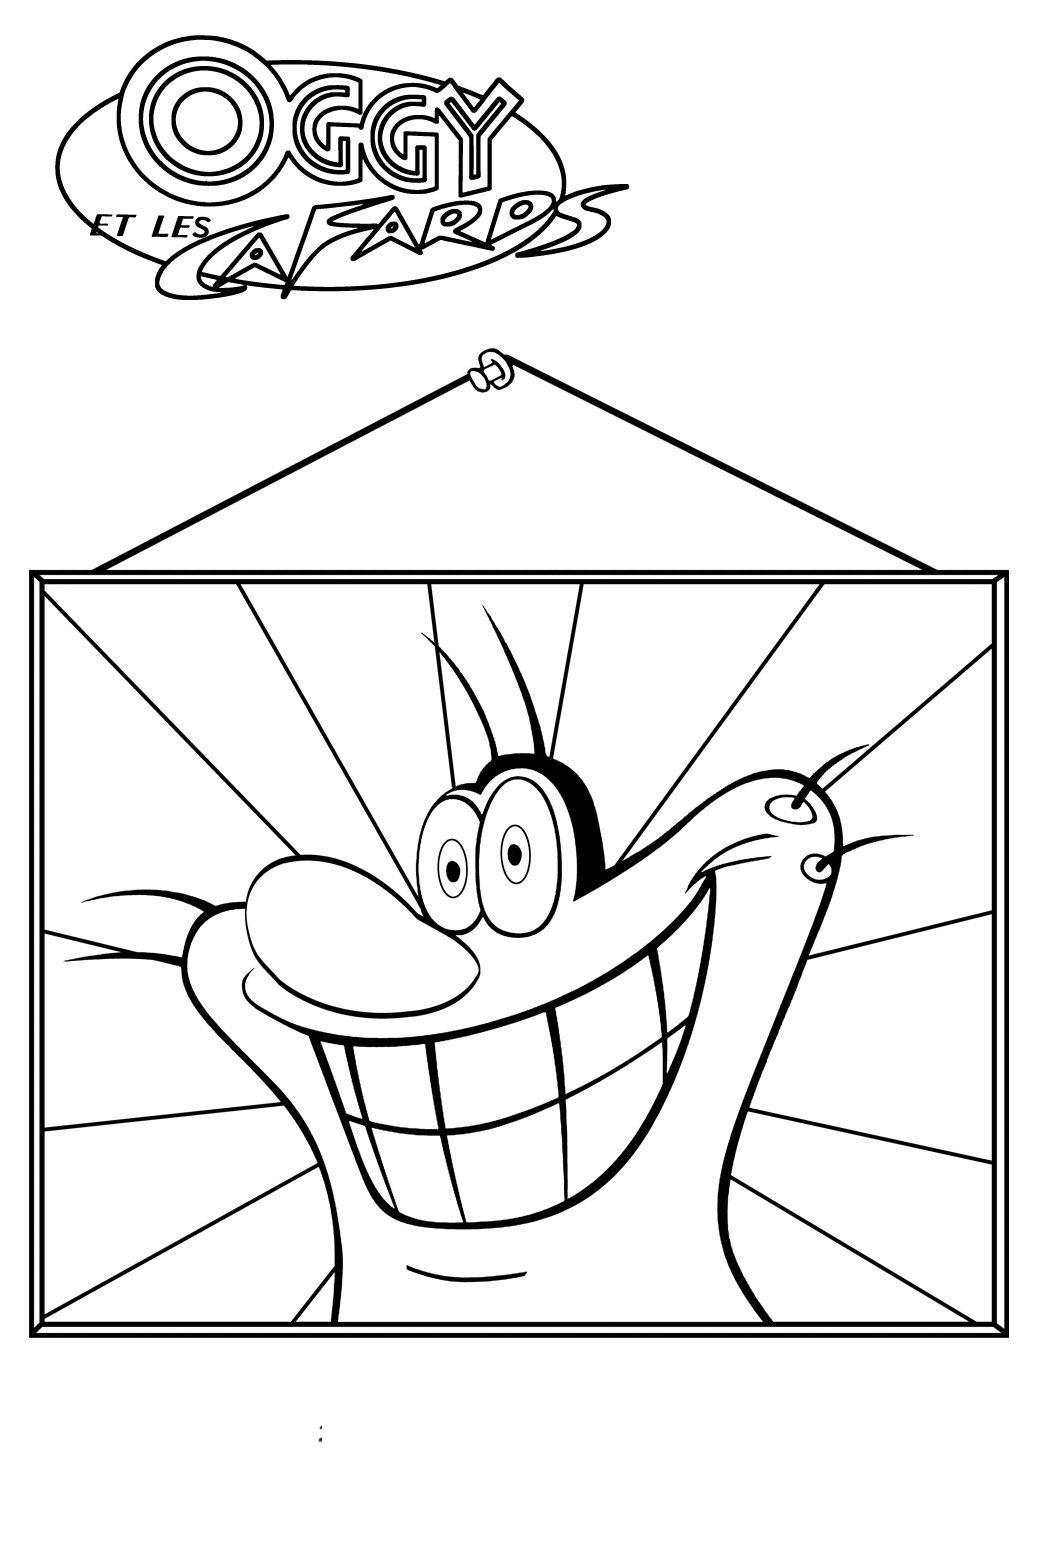 Oggy And The Cockroaches 16 Cool Coloring Page